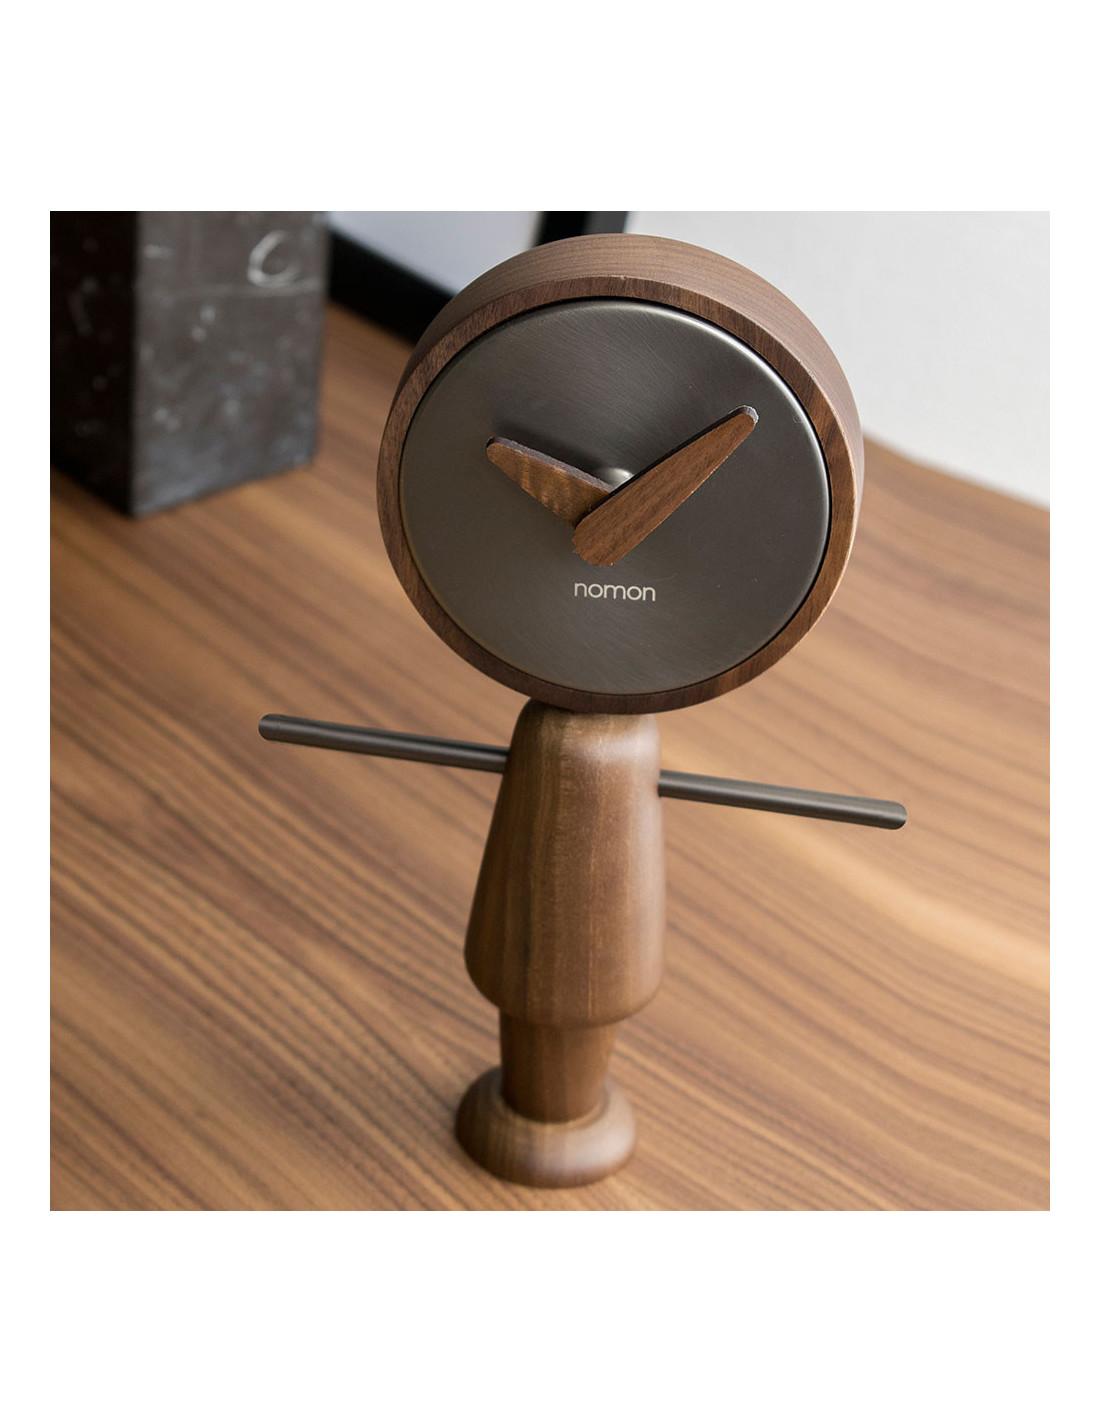 Friendly and fun clocks ideal as a gift to decorate the living room, kitchen or a modern office. Nene table clock with body and hands in oak or walnut wood and graphite lacquered.
Nene table clock : Box in graphite finished brass, hands and body in